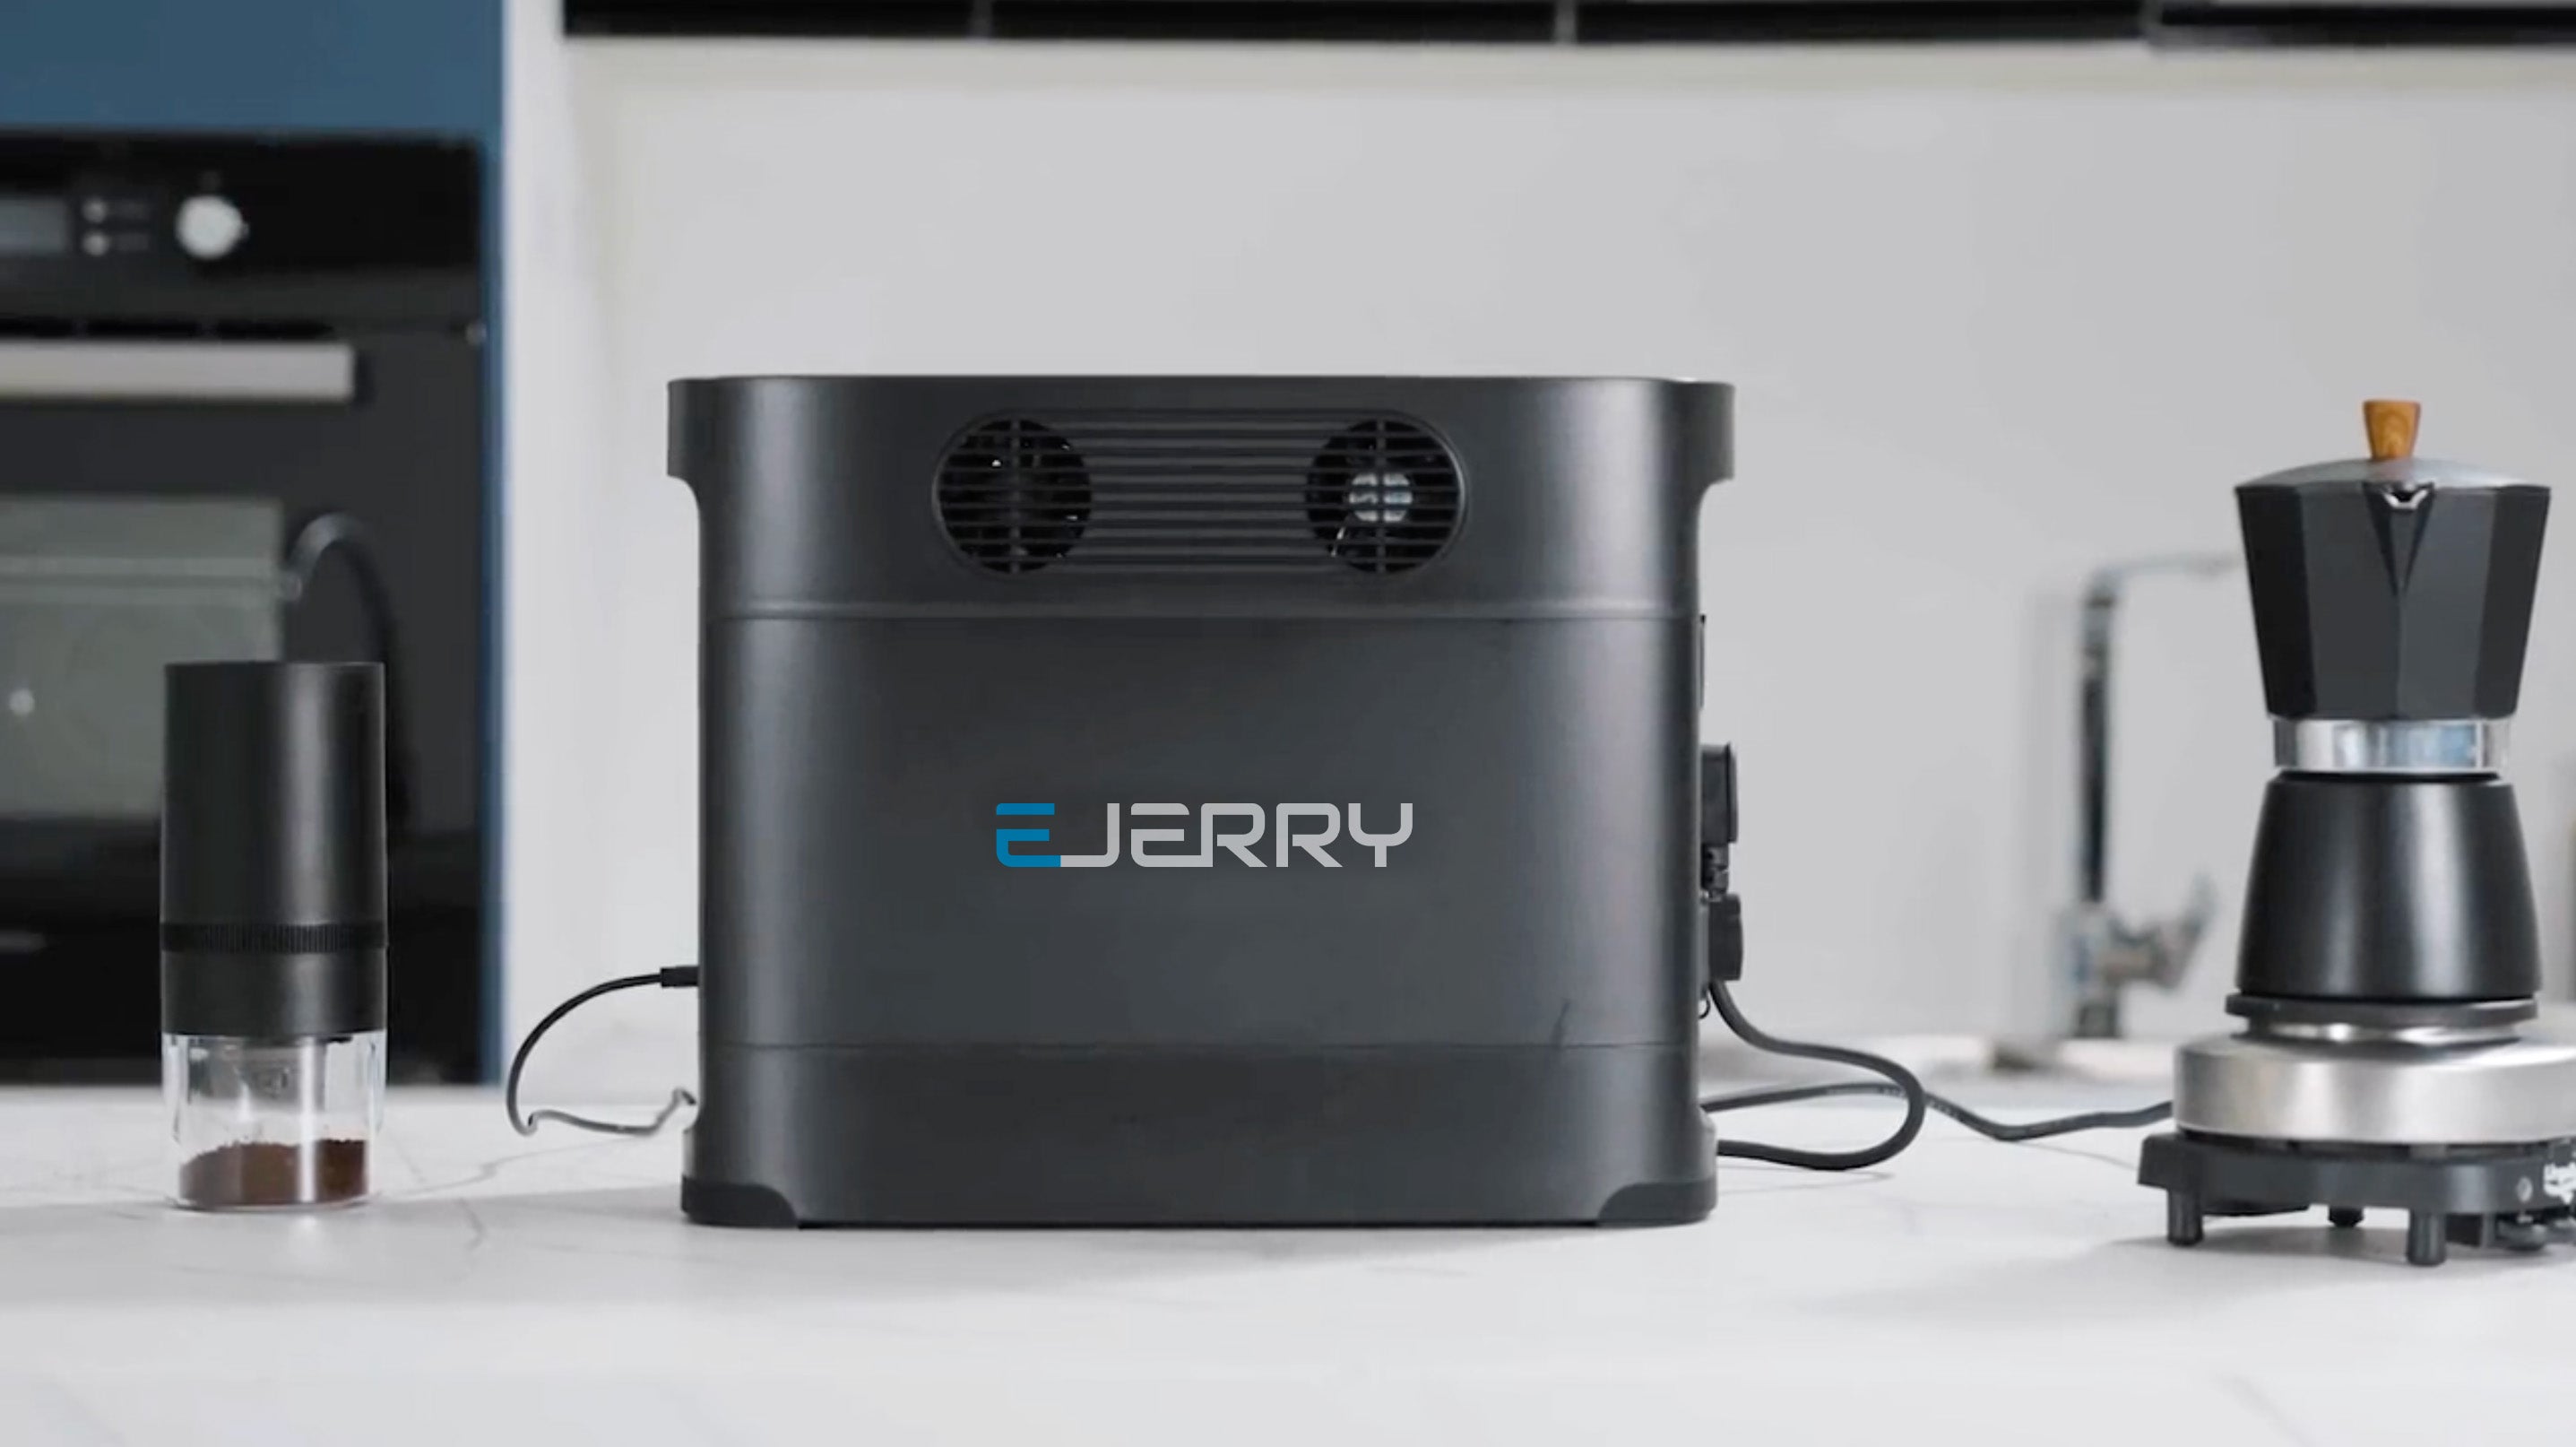 EJERRY EV Charger on Kitchen table with appliances